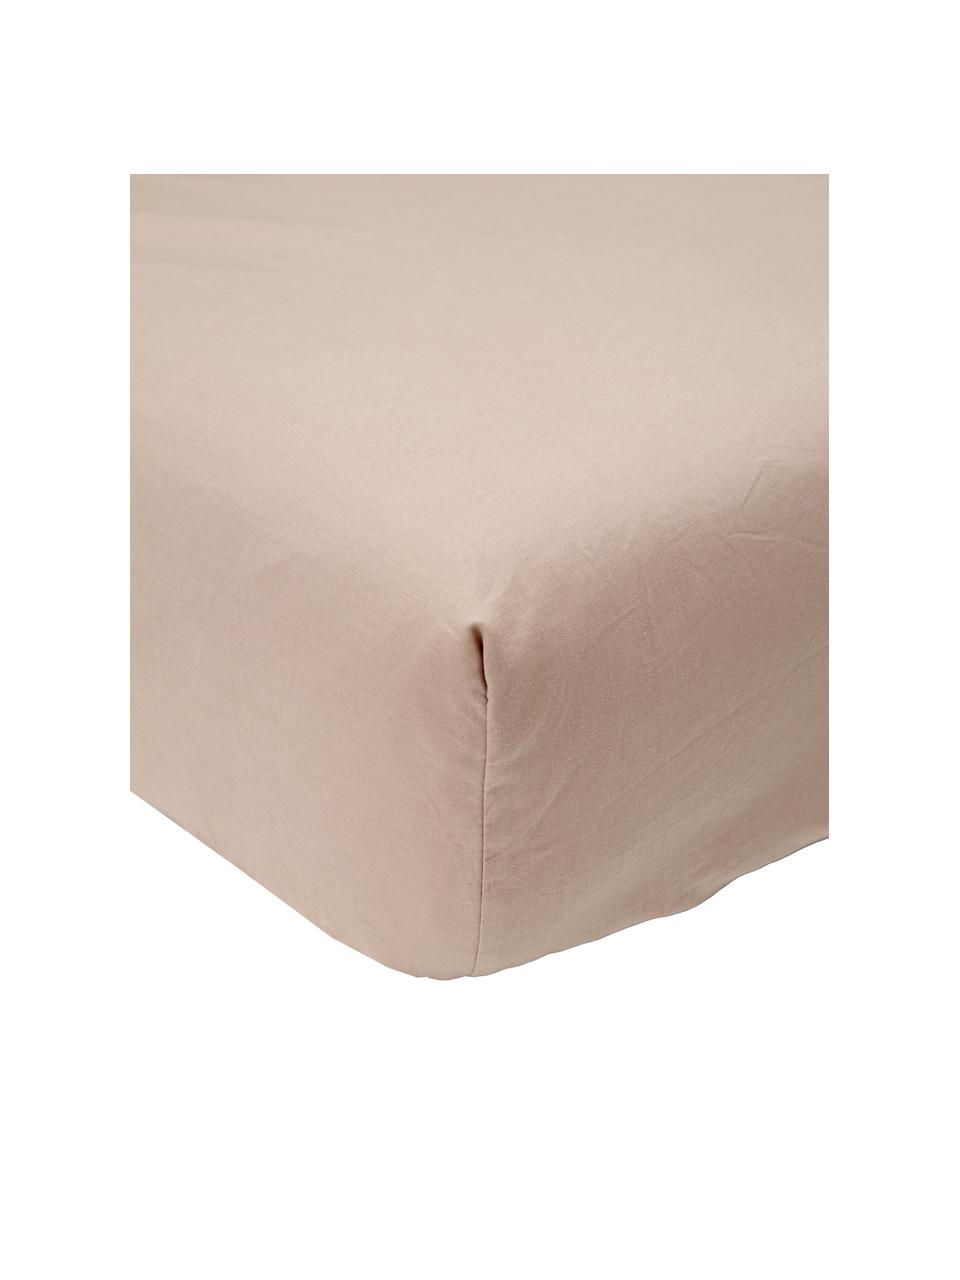 Drap-housse percale taupe Elsie, Taupe, larg. 90 x long. 200 cm